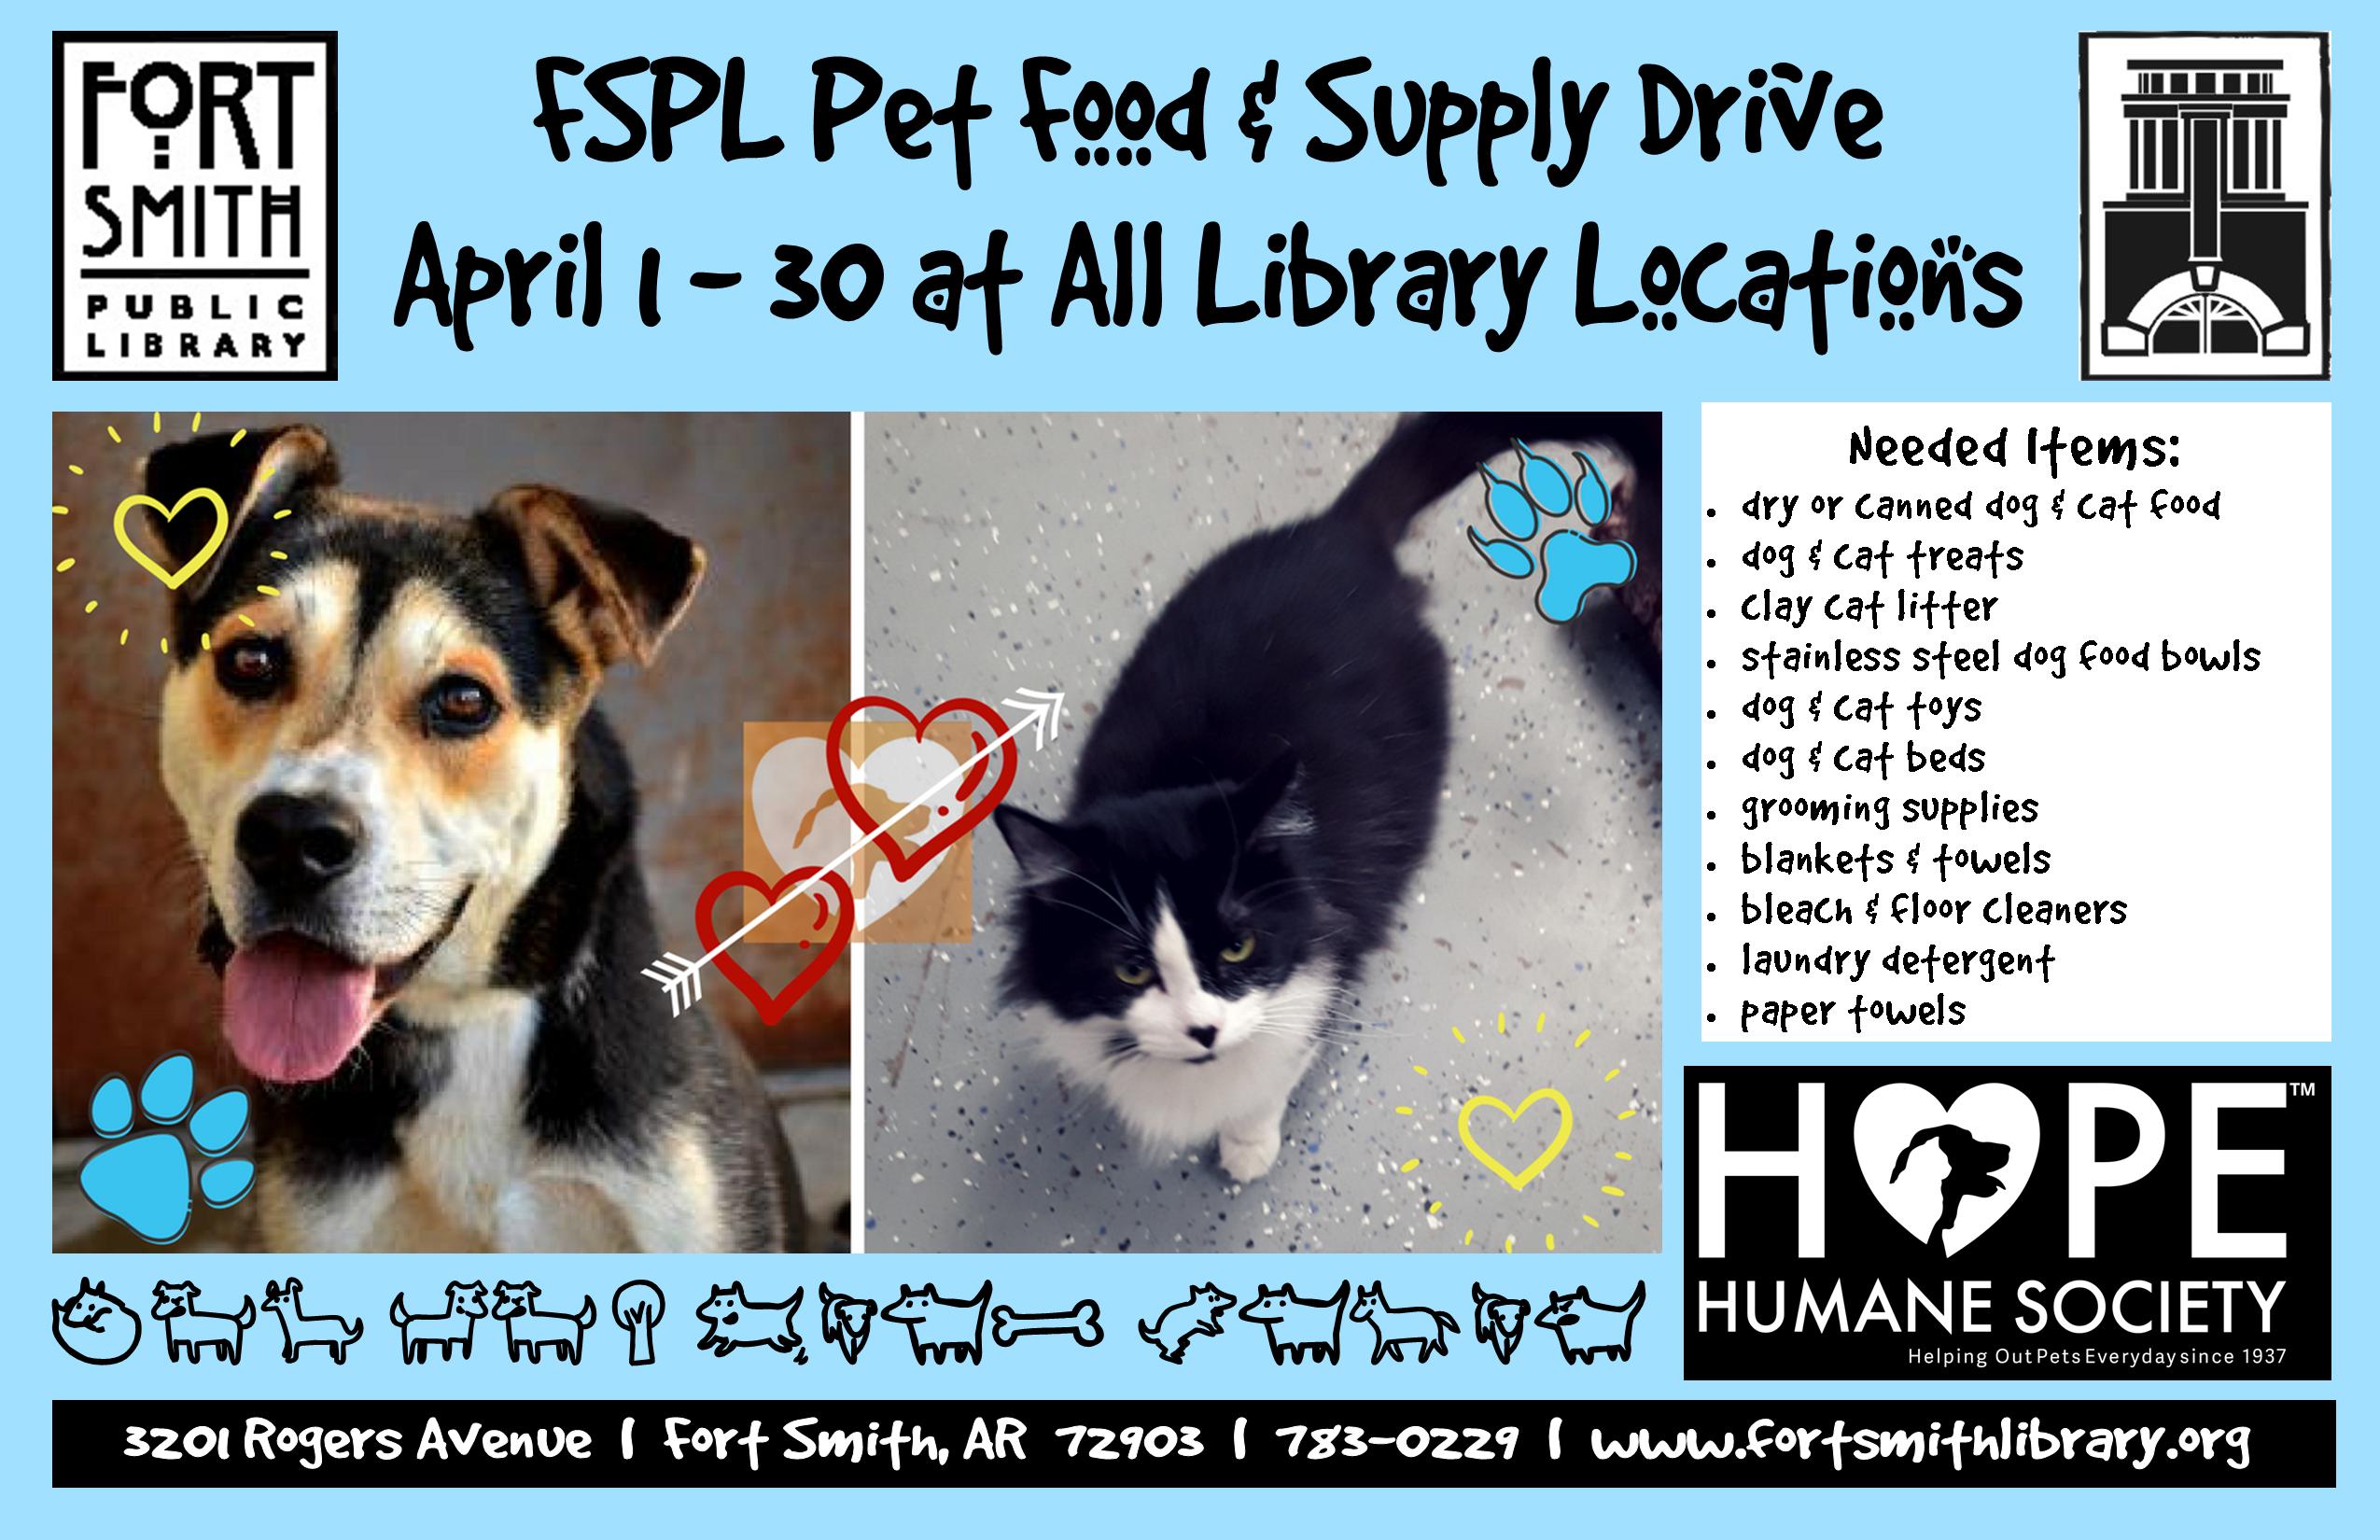 Pet food and supply drive poster